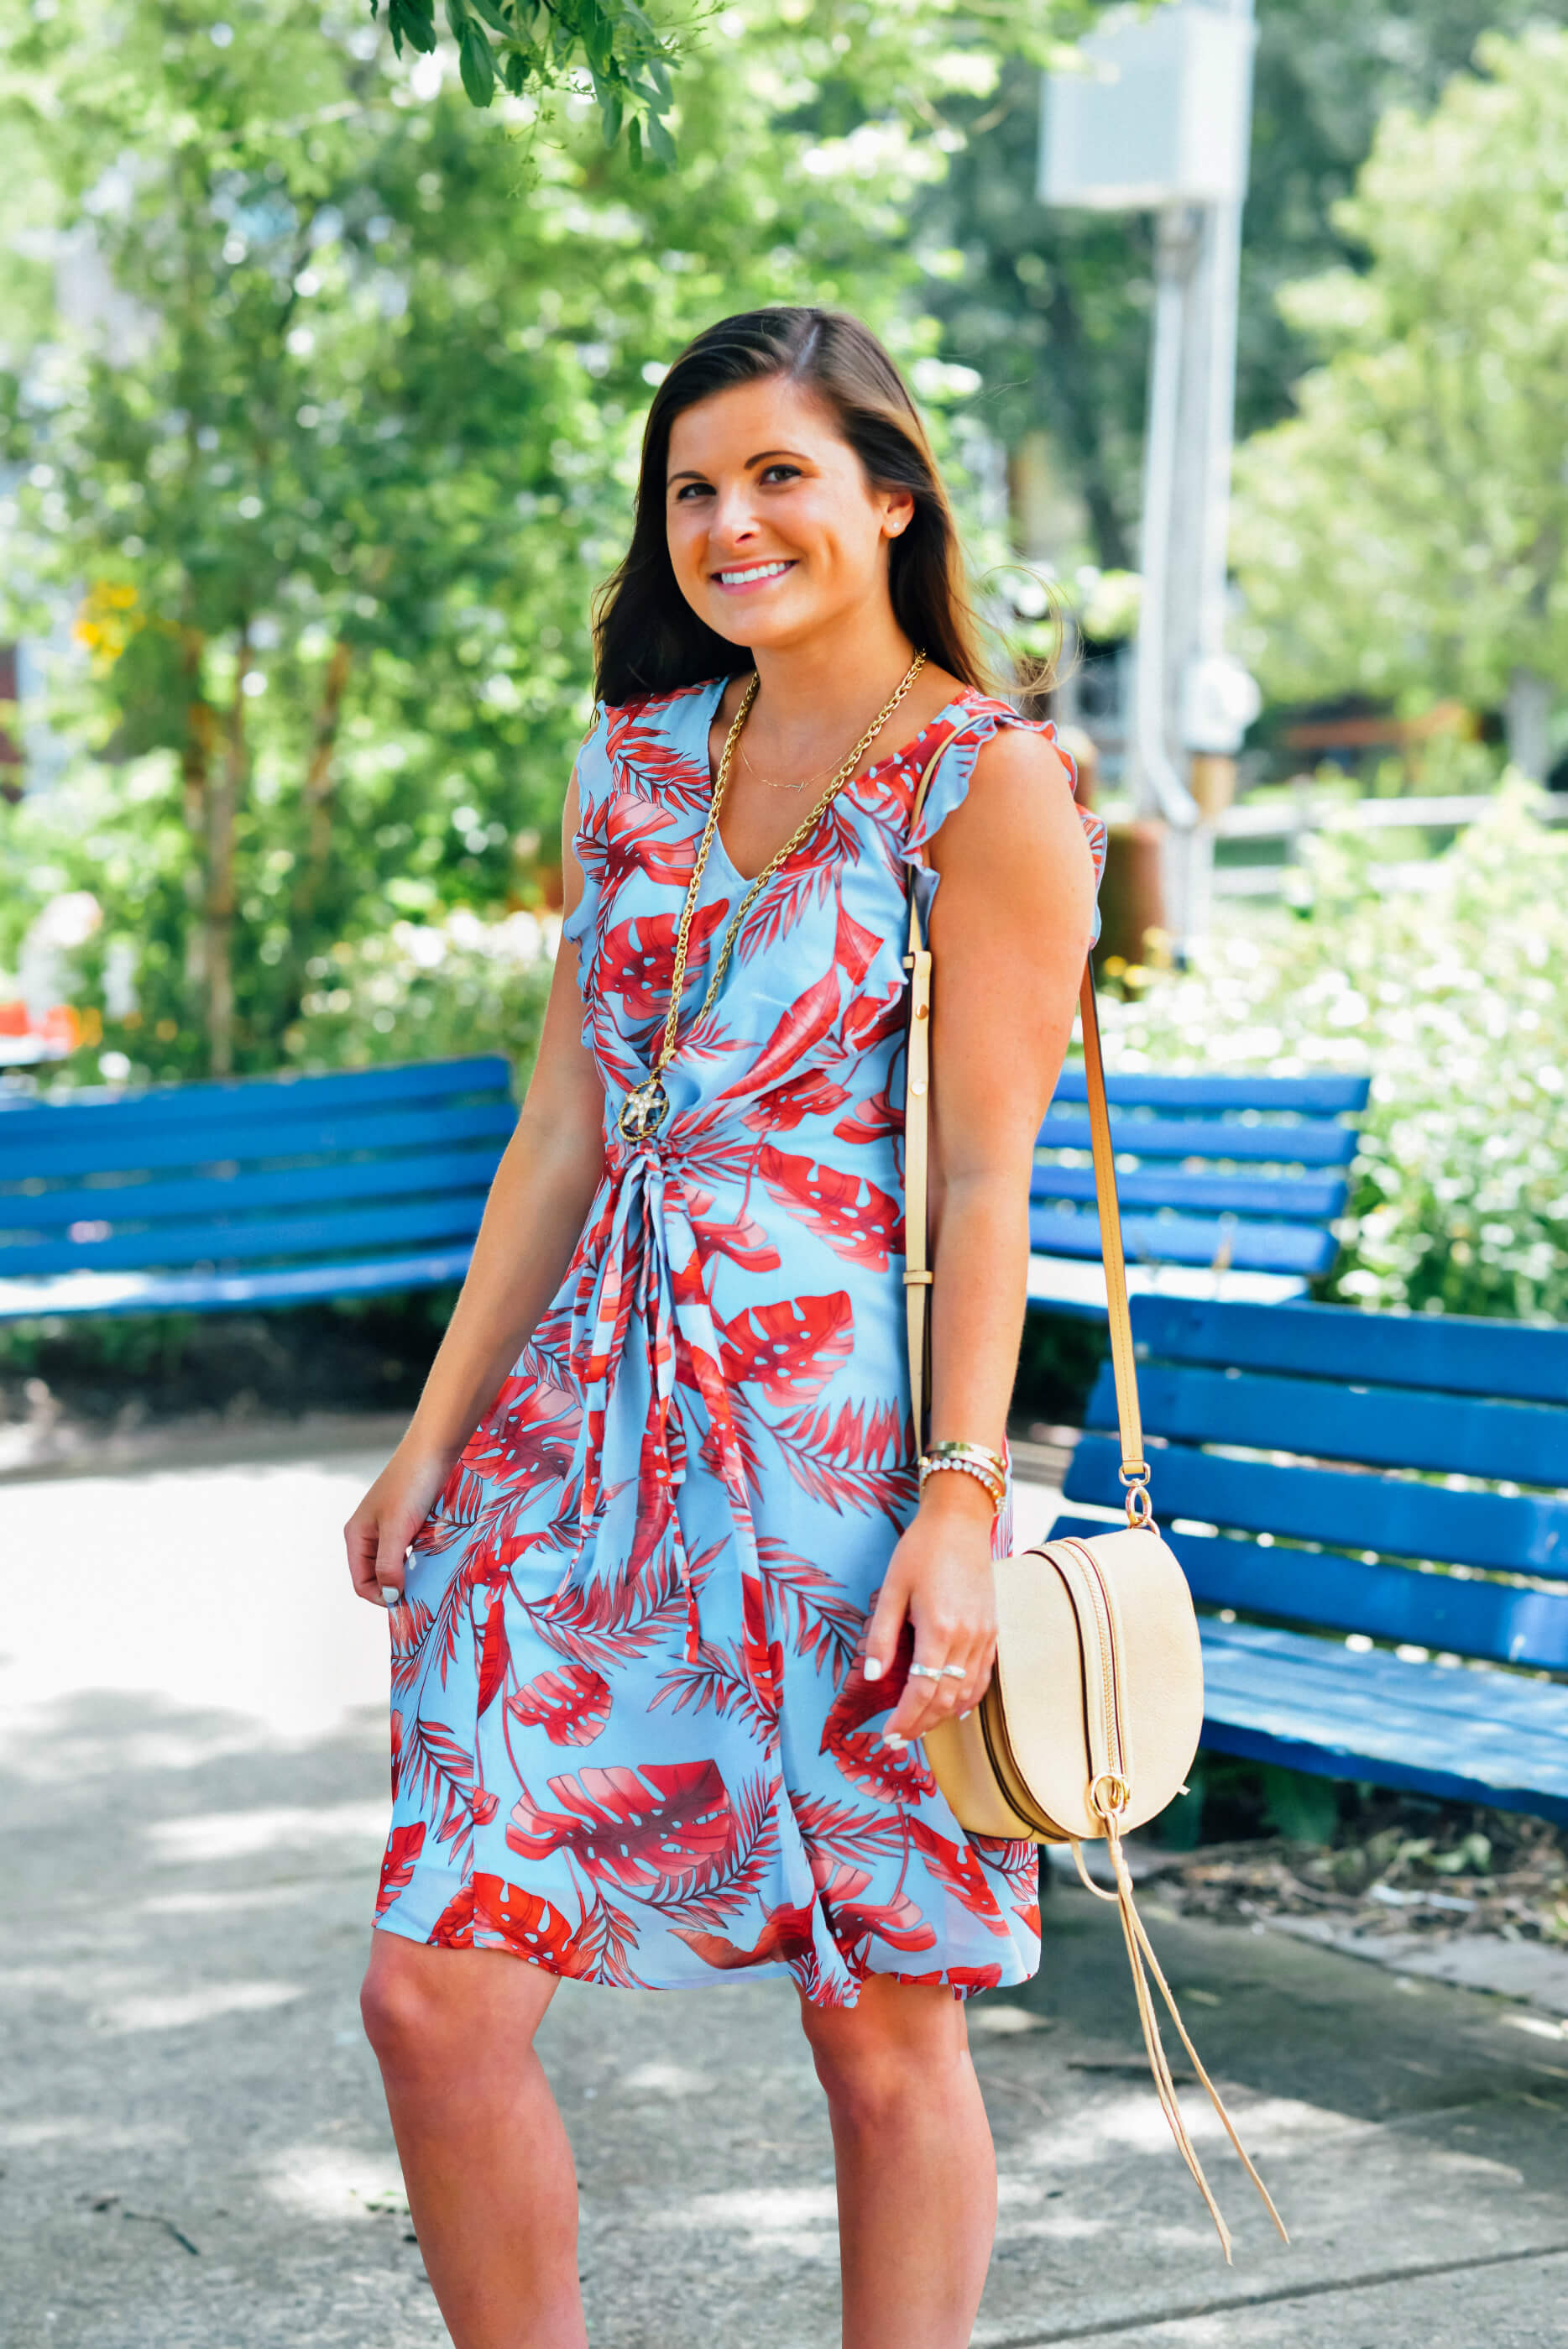 Cabi Clothing, Spring Summer Collection, Rebecca Minkoff Saddle Bag, Blue & Red Tropical Print Dress, Red Sandals, Summer Outfit, Tilden of To Be Bright